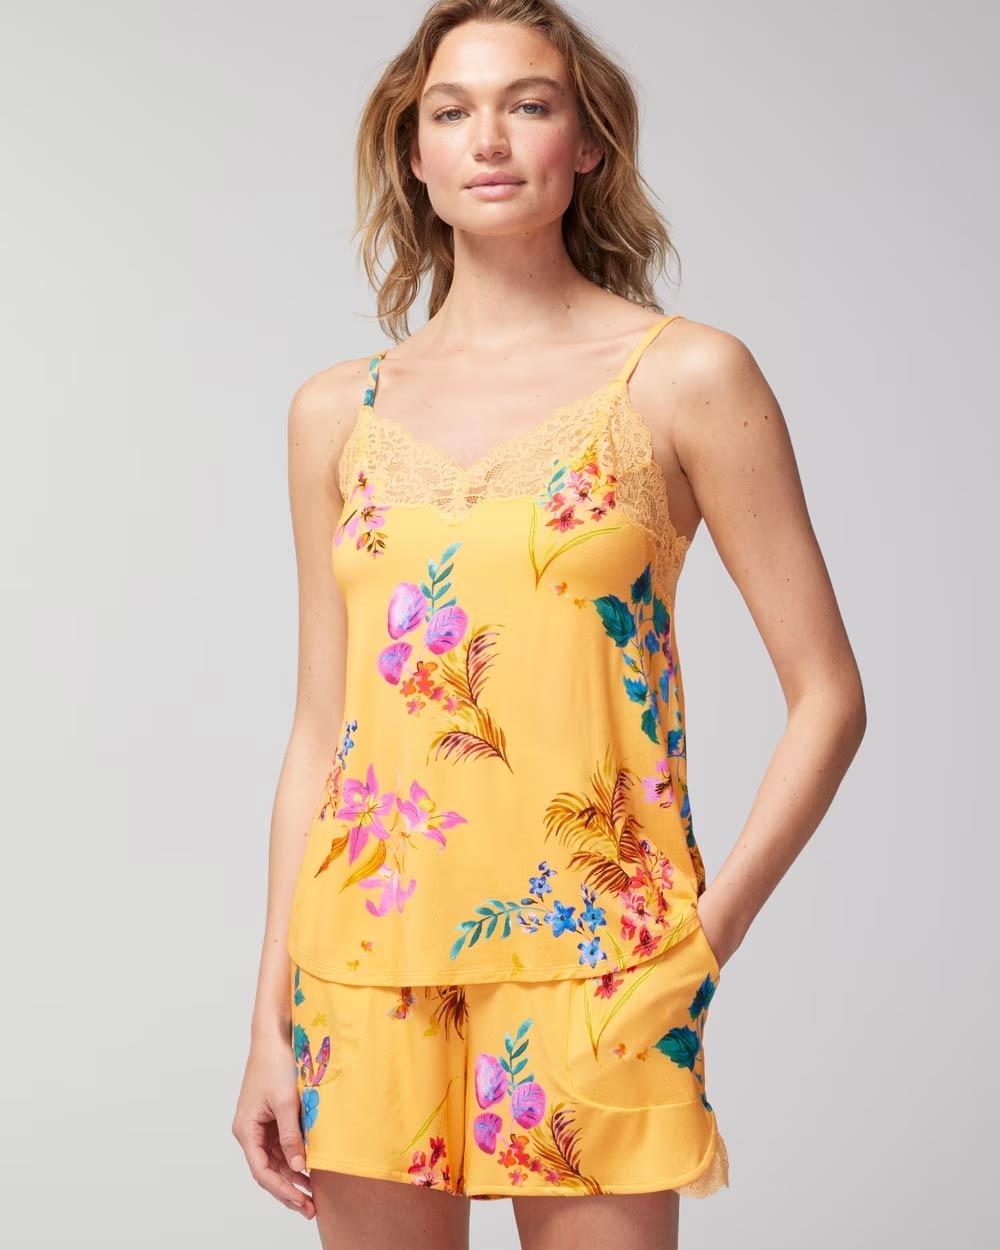 Soma<sup class=st-superscript>®</sup> women’s model wearing a yellow lace-trimmed floral cami with matching shorts.